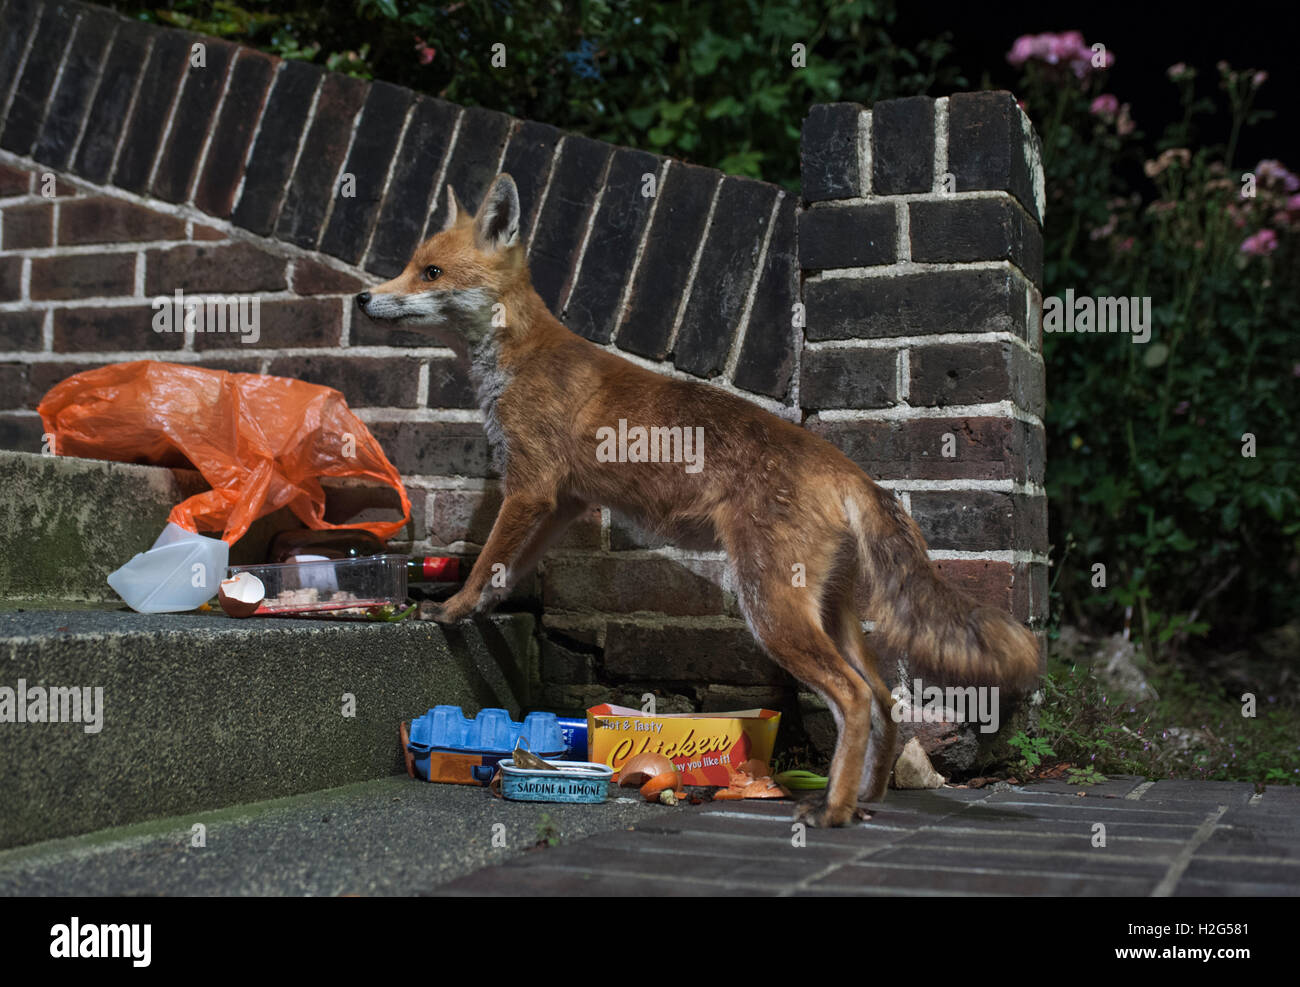 urban Red Fox, Vulpes vulpes, searches rubbish bags to scavenge for food scraps at night, London, Great Britain, UK Stock Photo